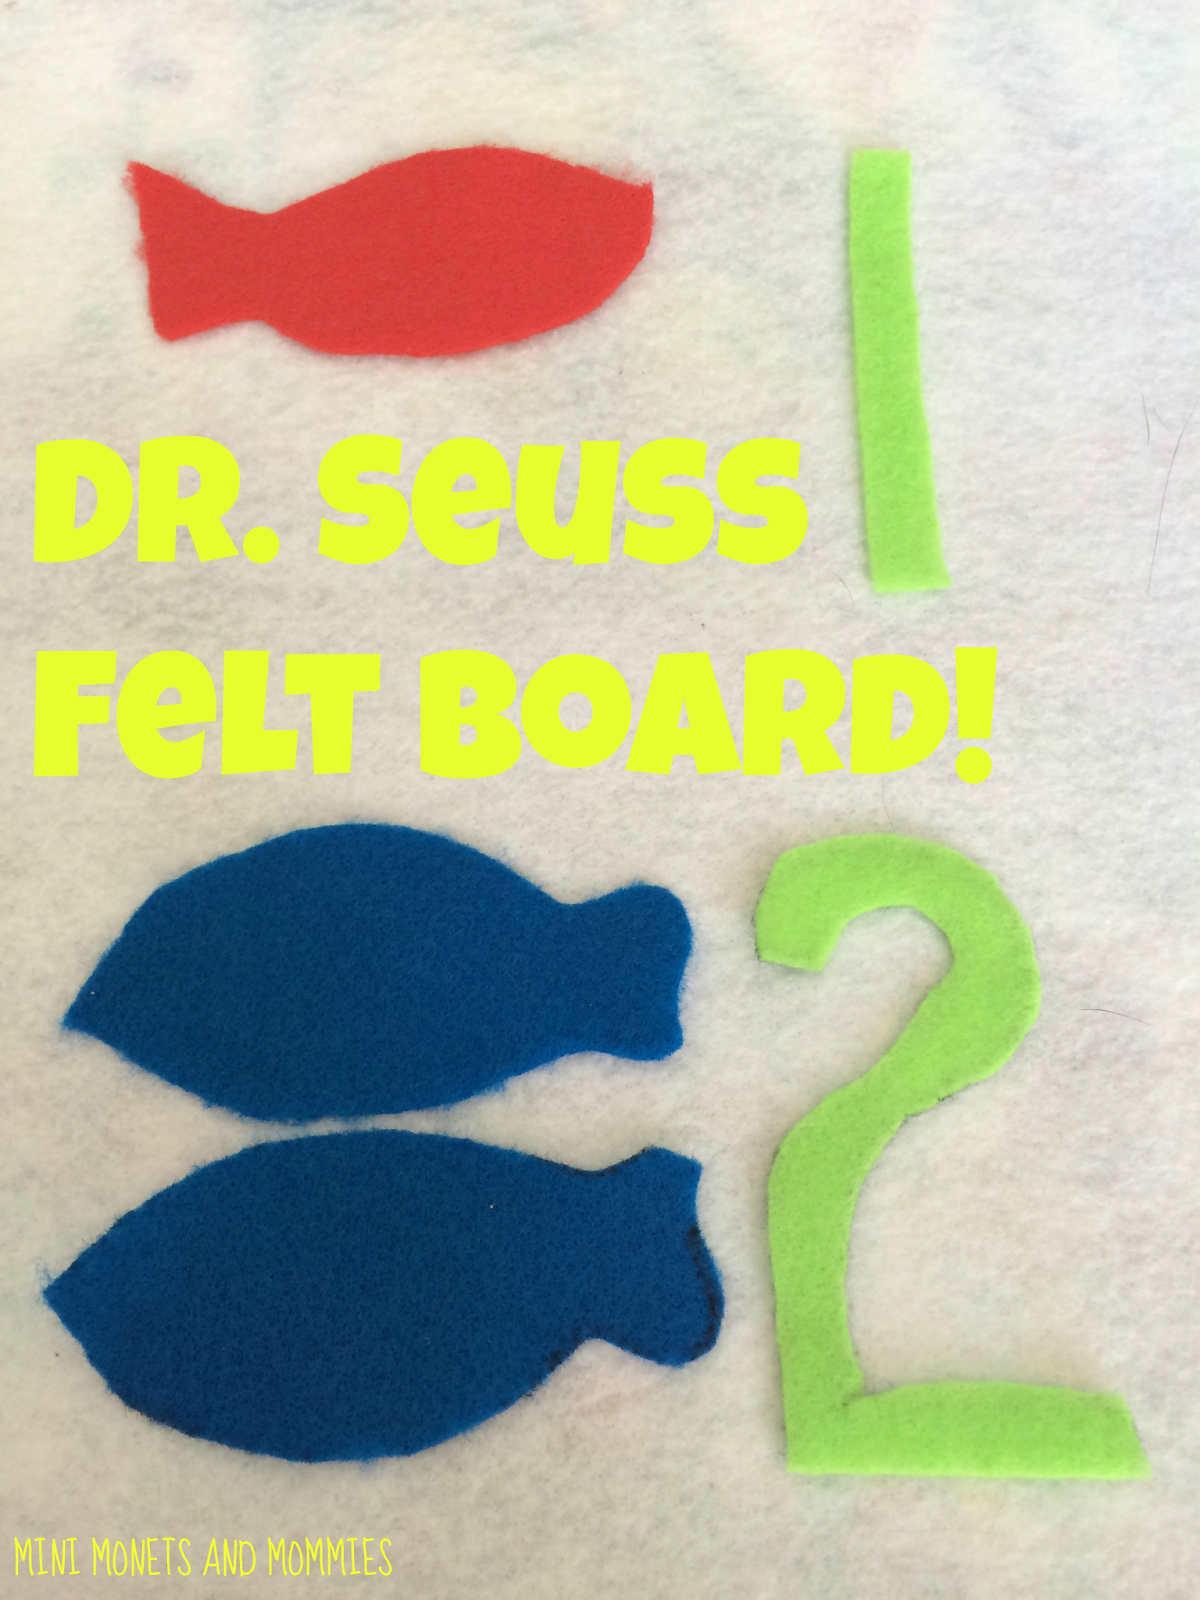 Dr. Seuss felt board with red fish, blue fish, 1 and 2 